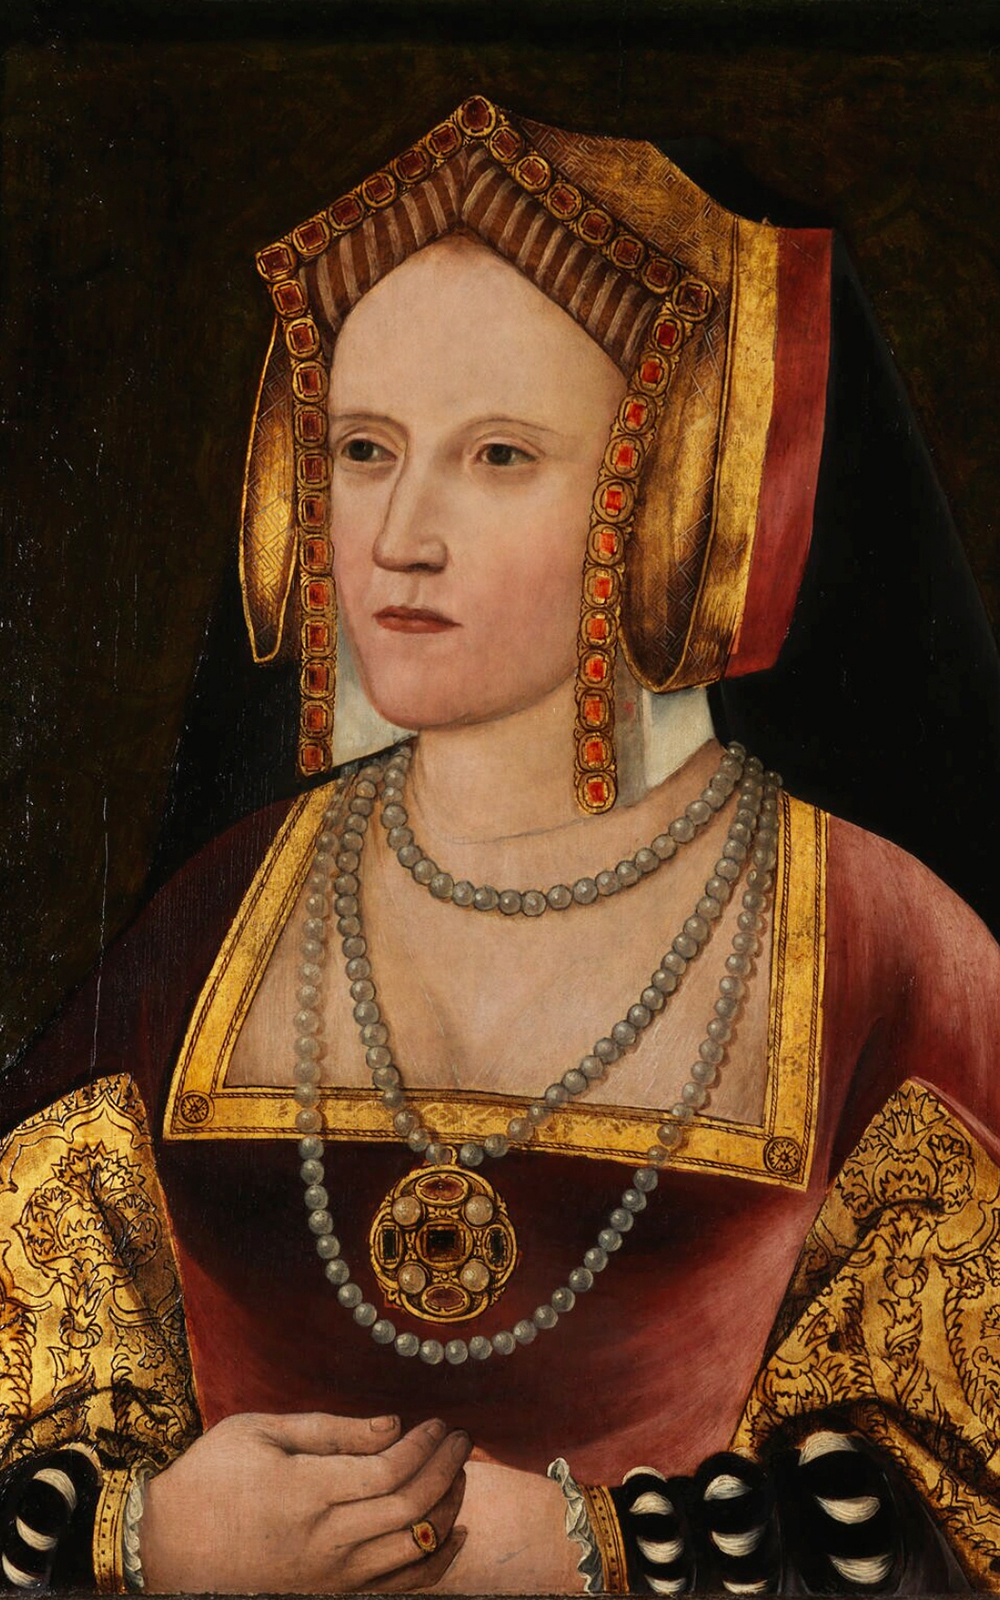 A portrait of Catharine of Aragon